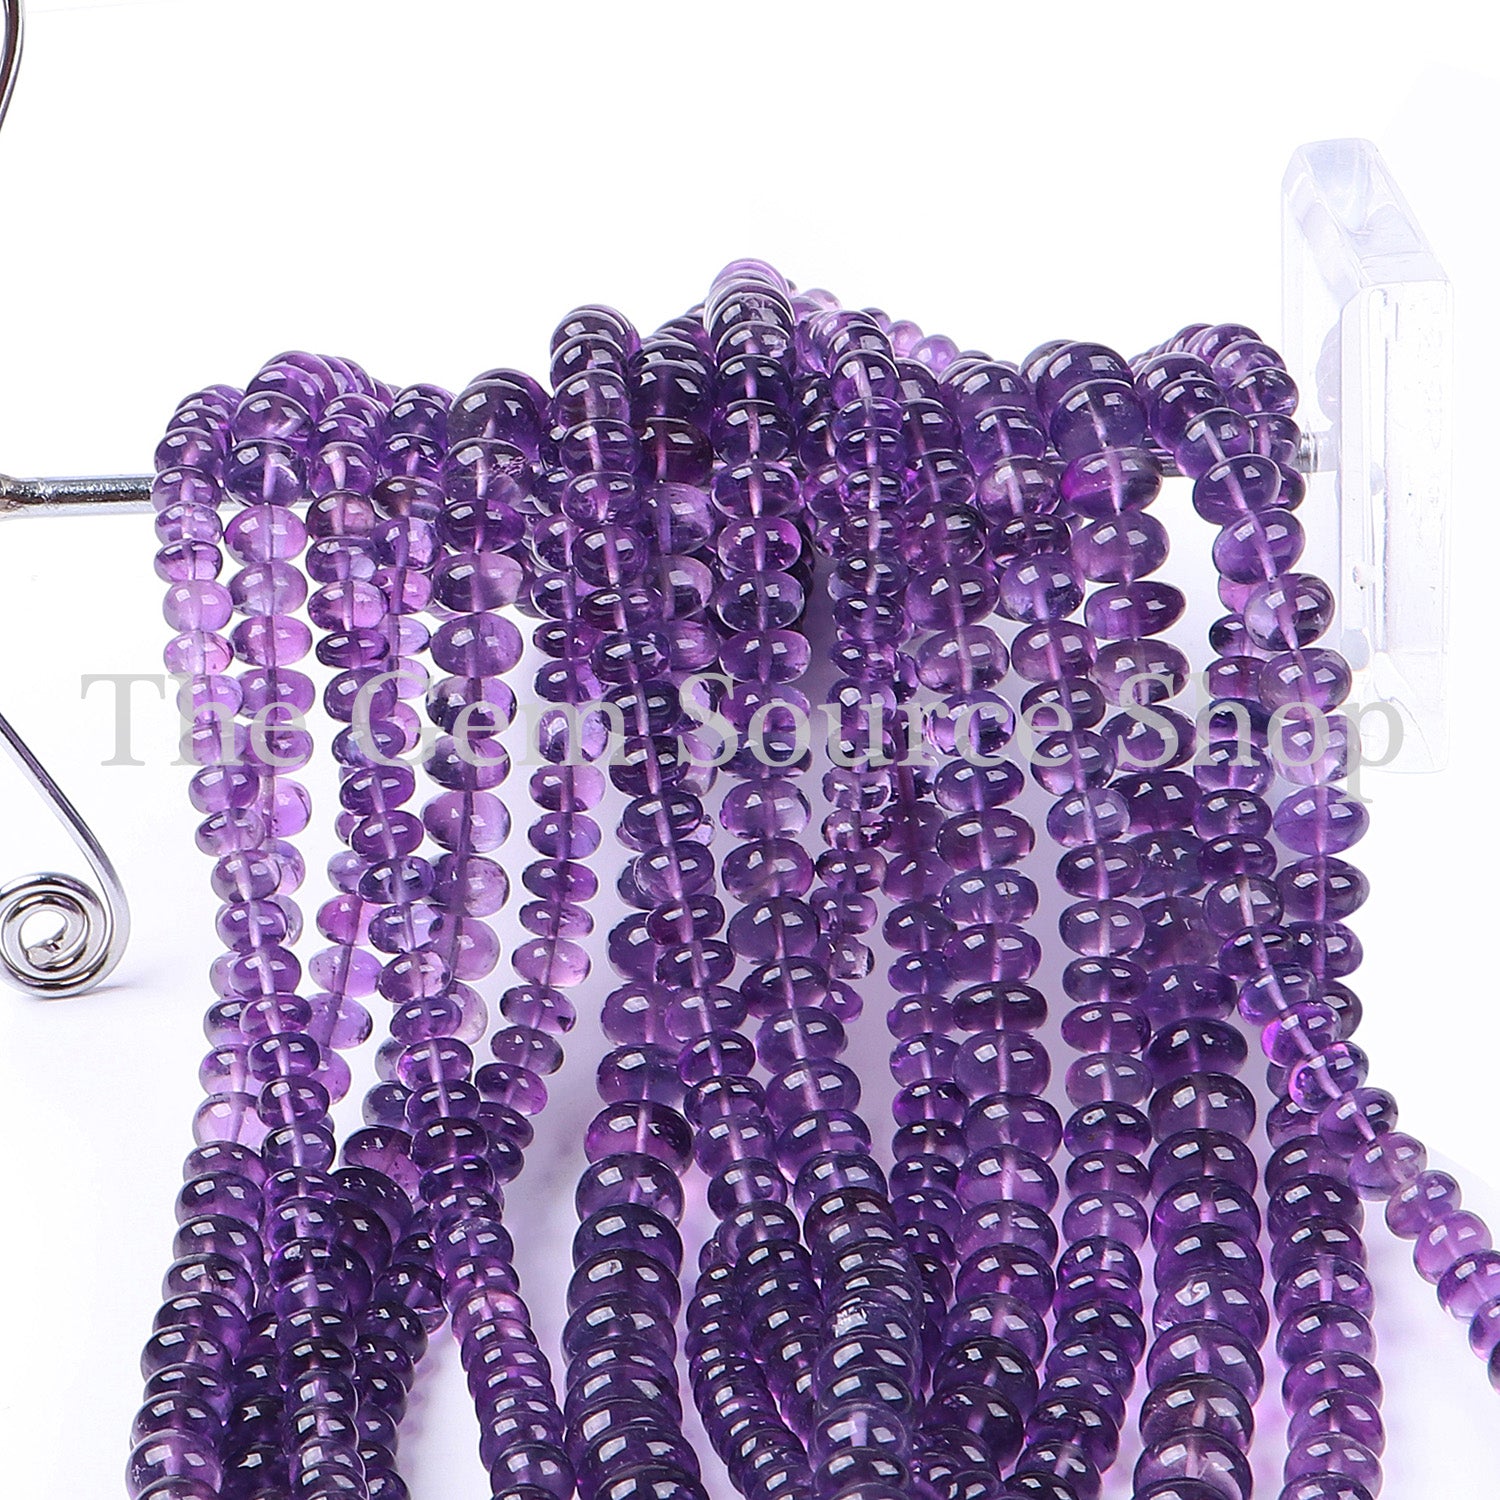 6-8mm Natural Amethyst Beads, Amethyst Smooth Rondelle Beads, Plain Amethyst Beads, Wholesale Beads